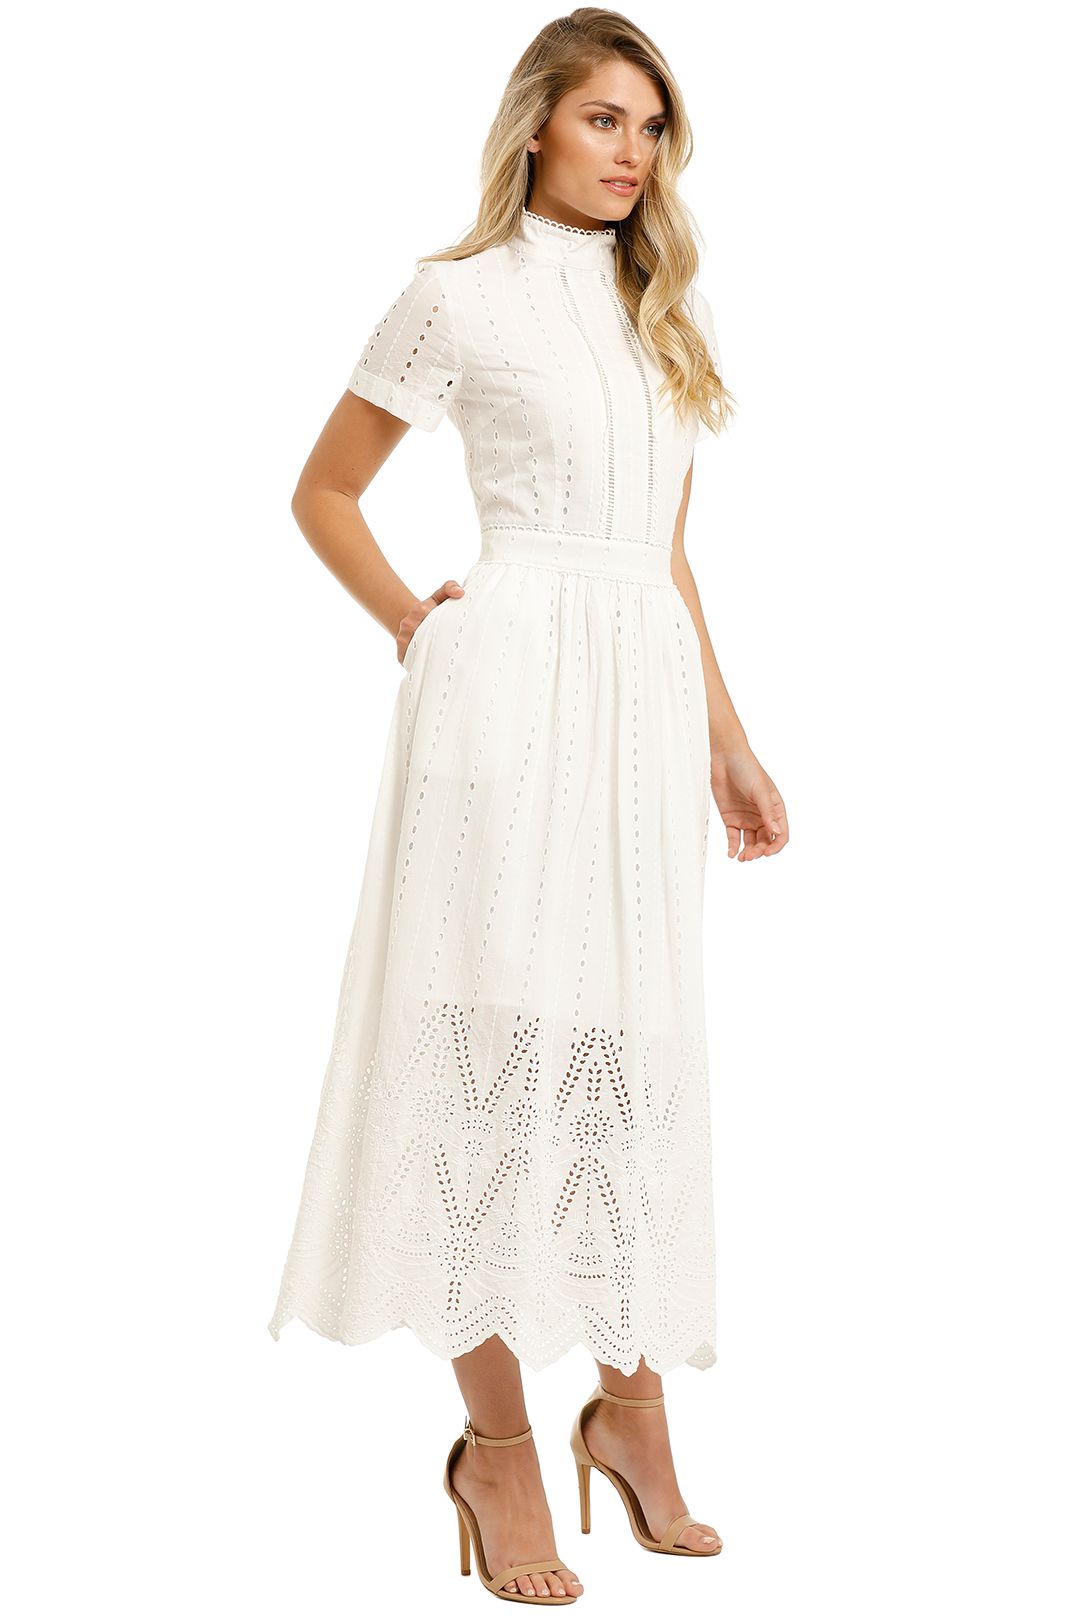 We-Are-Kindred-Lola-High-Neck-Dress-White-Side